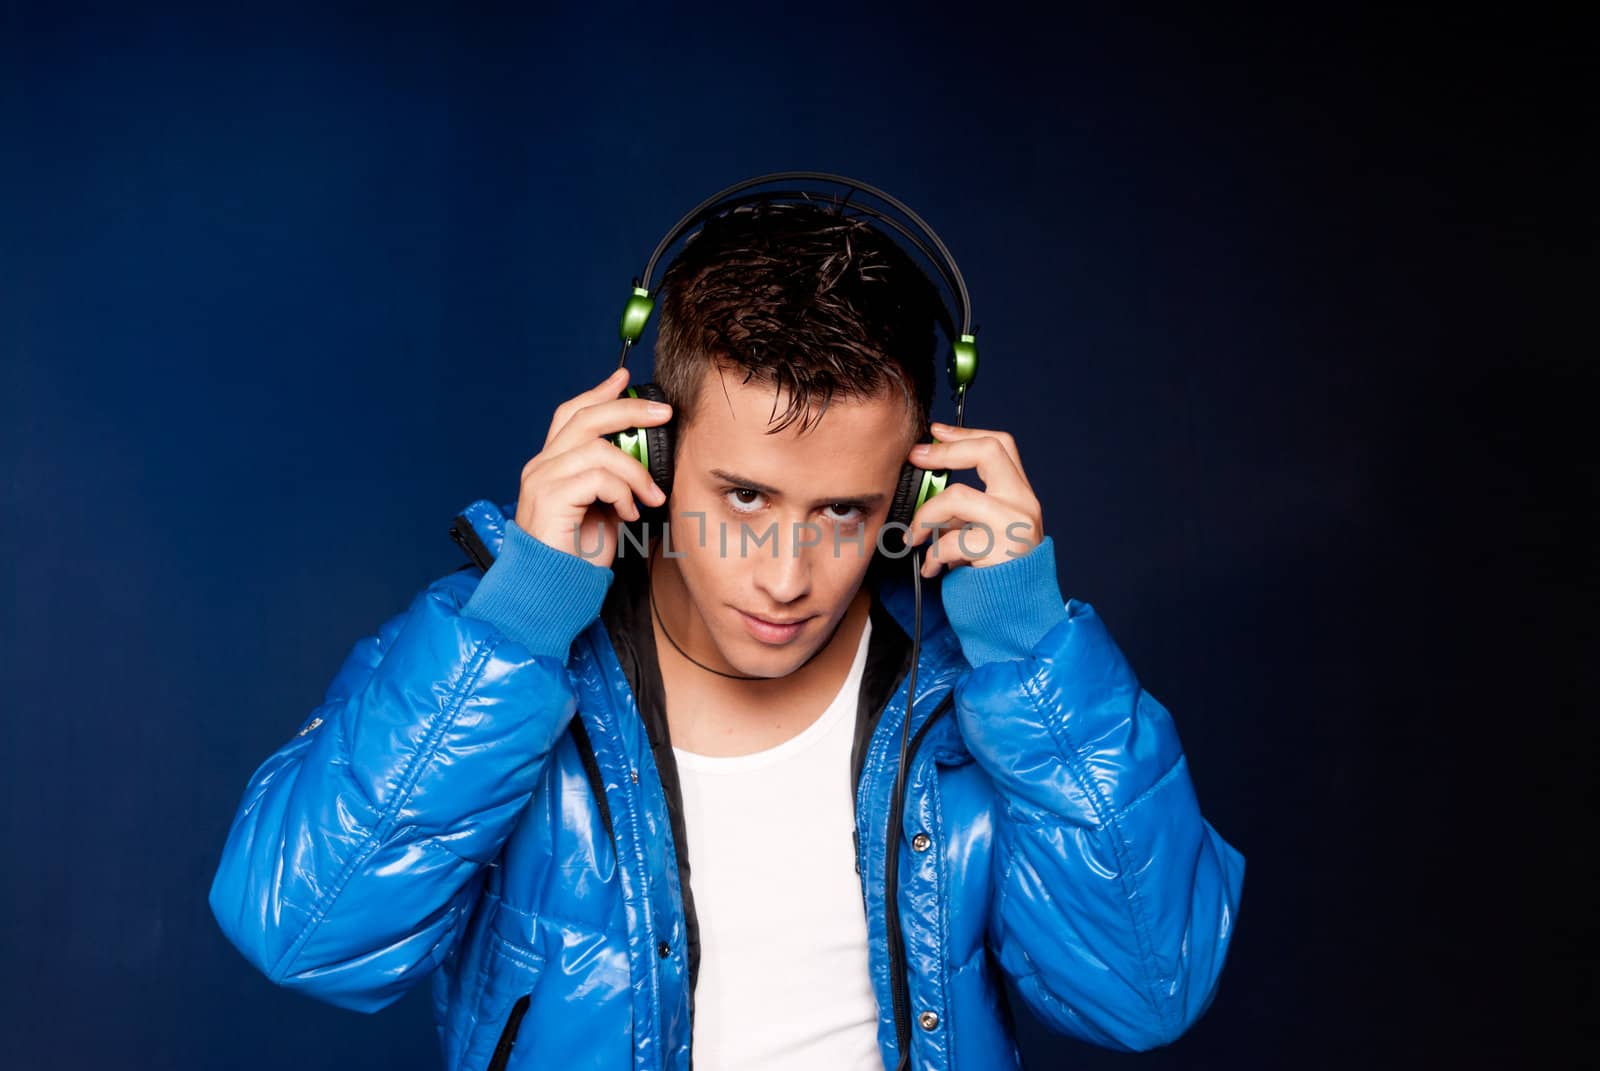 Young man listening music with headphones portrait on blue ligh background